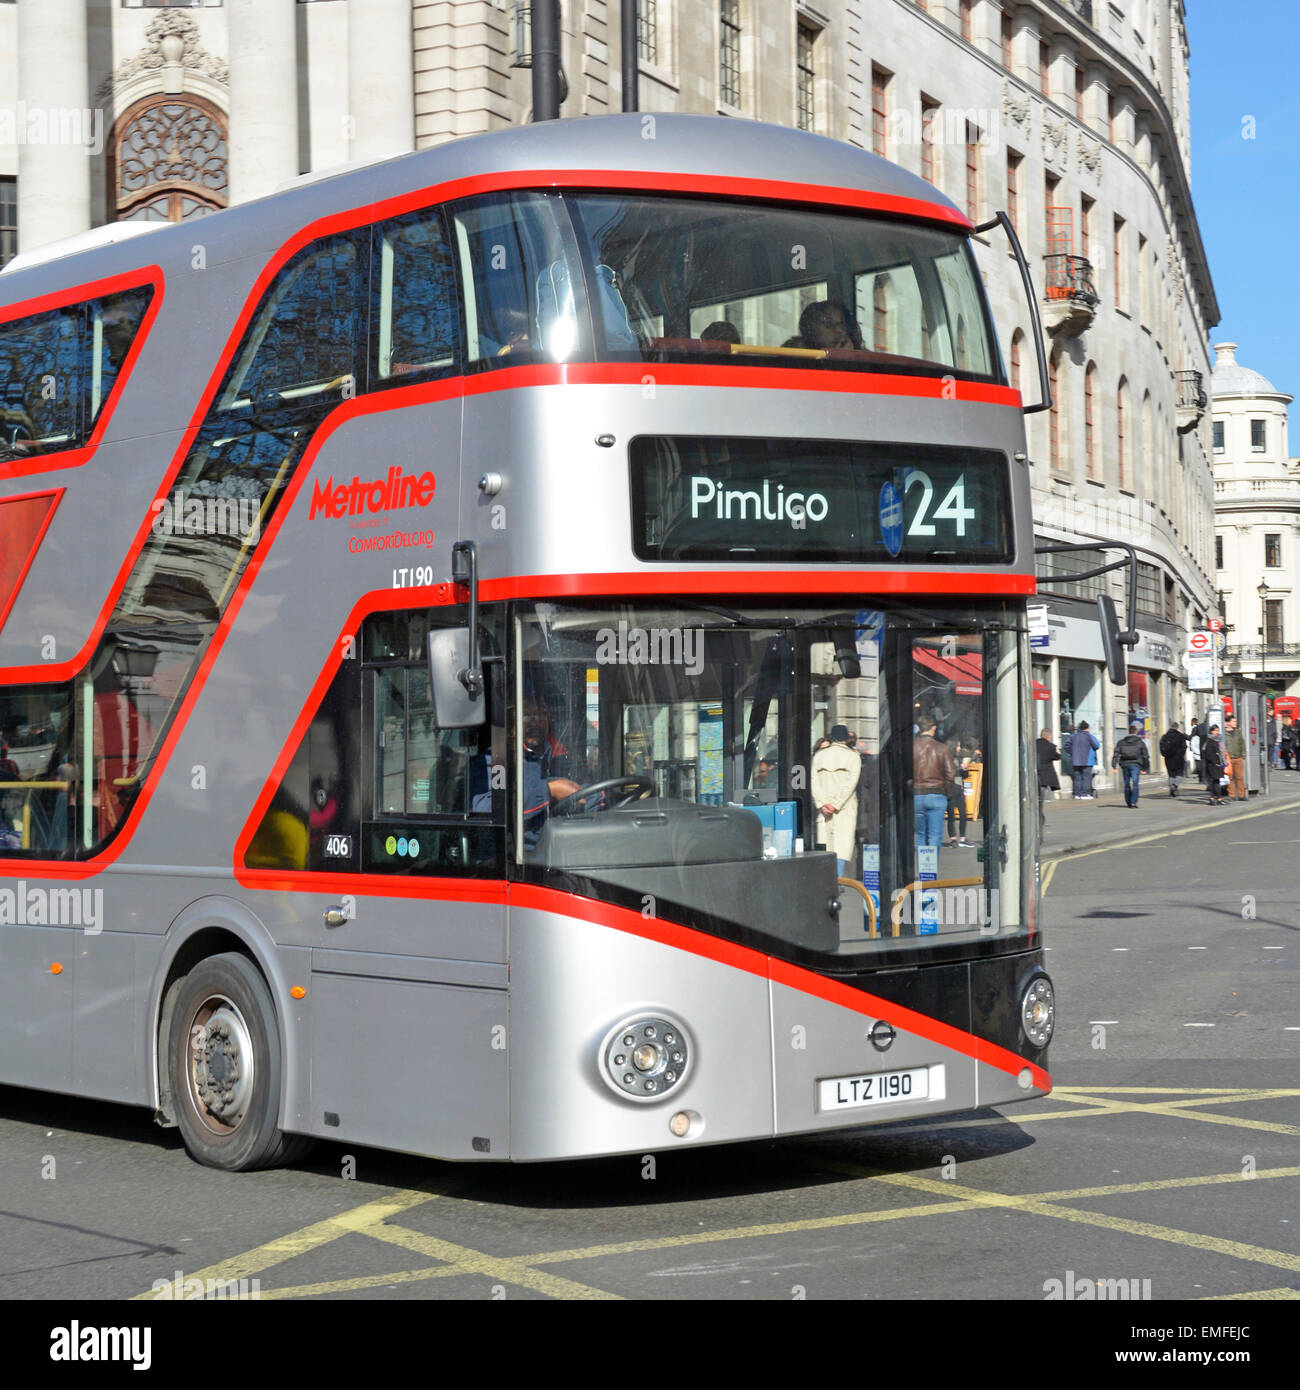 Silver edition of new London Routemaster Boris bus operated by Metroline on route 24 running to Pimlico London England UK Stock Photo